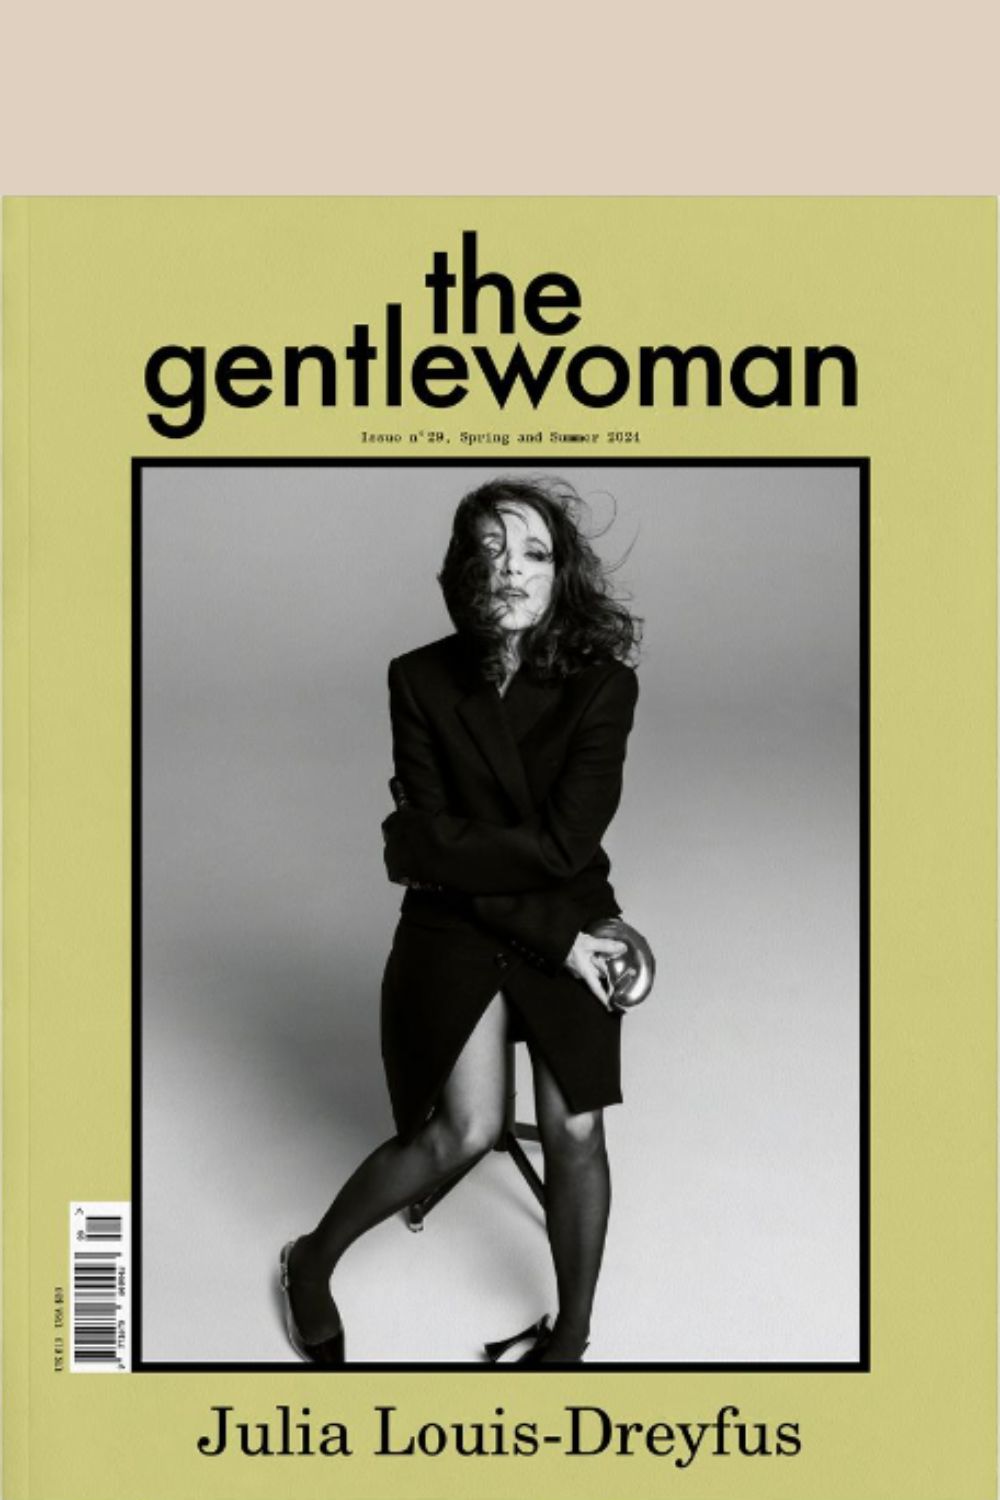 The Gentlewoman Magazine No 29 cover (Julia Lousi Dreyfus pictured in black and white with yellow/green border)